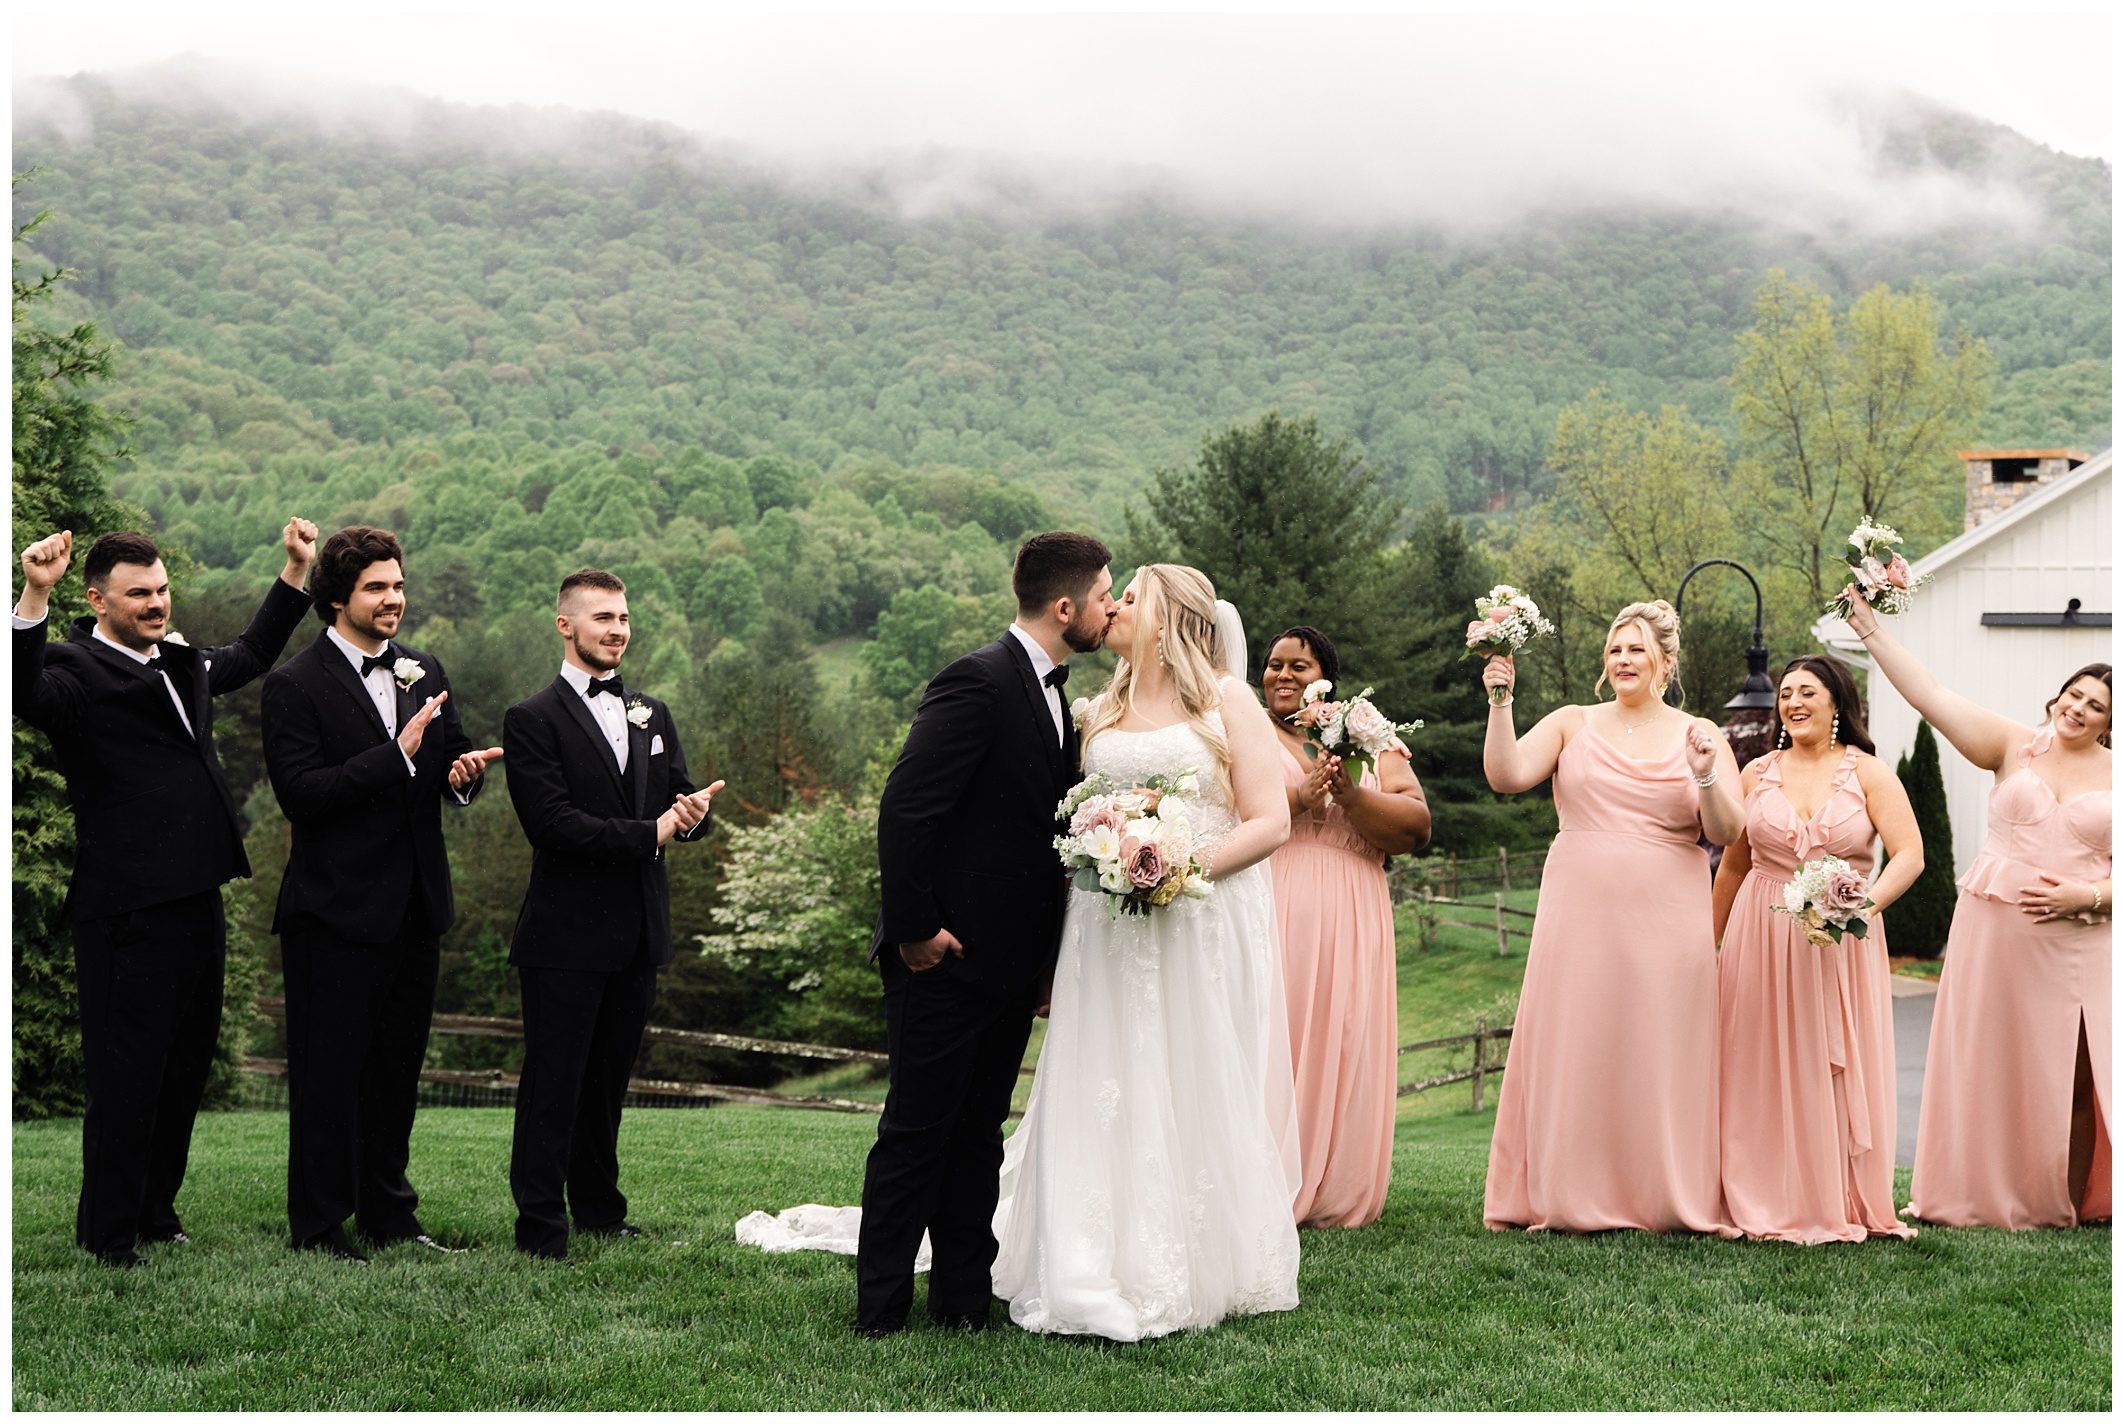 Bride and groom kissing in front of a wedding party, with rain-soaked mountains at Chestnut Ridge in the background and guests wearing black and pink.